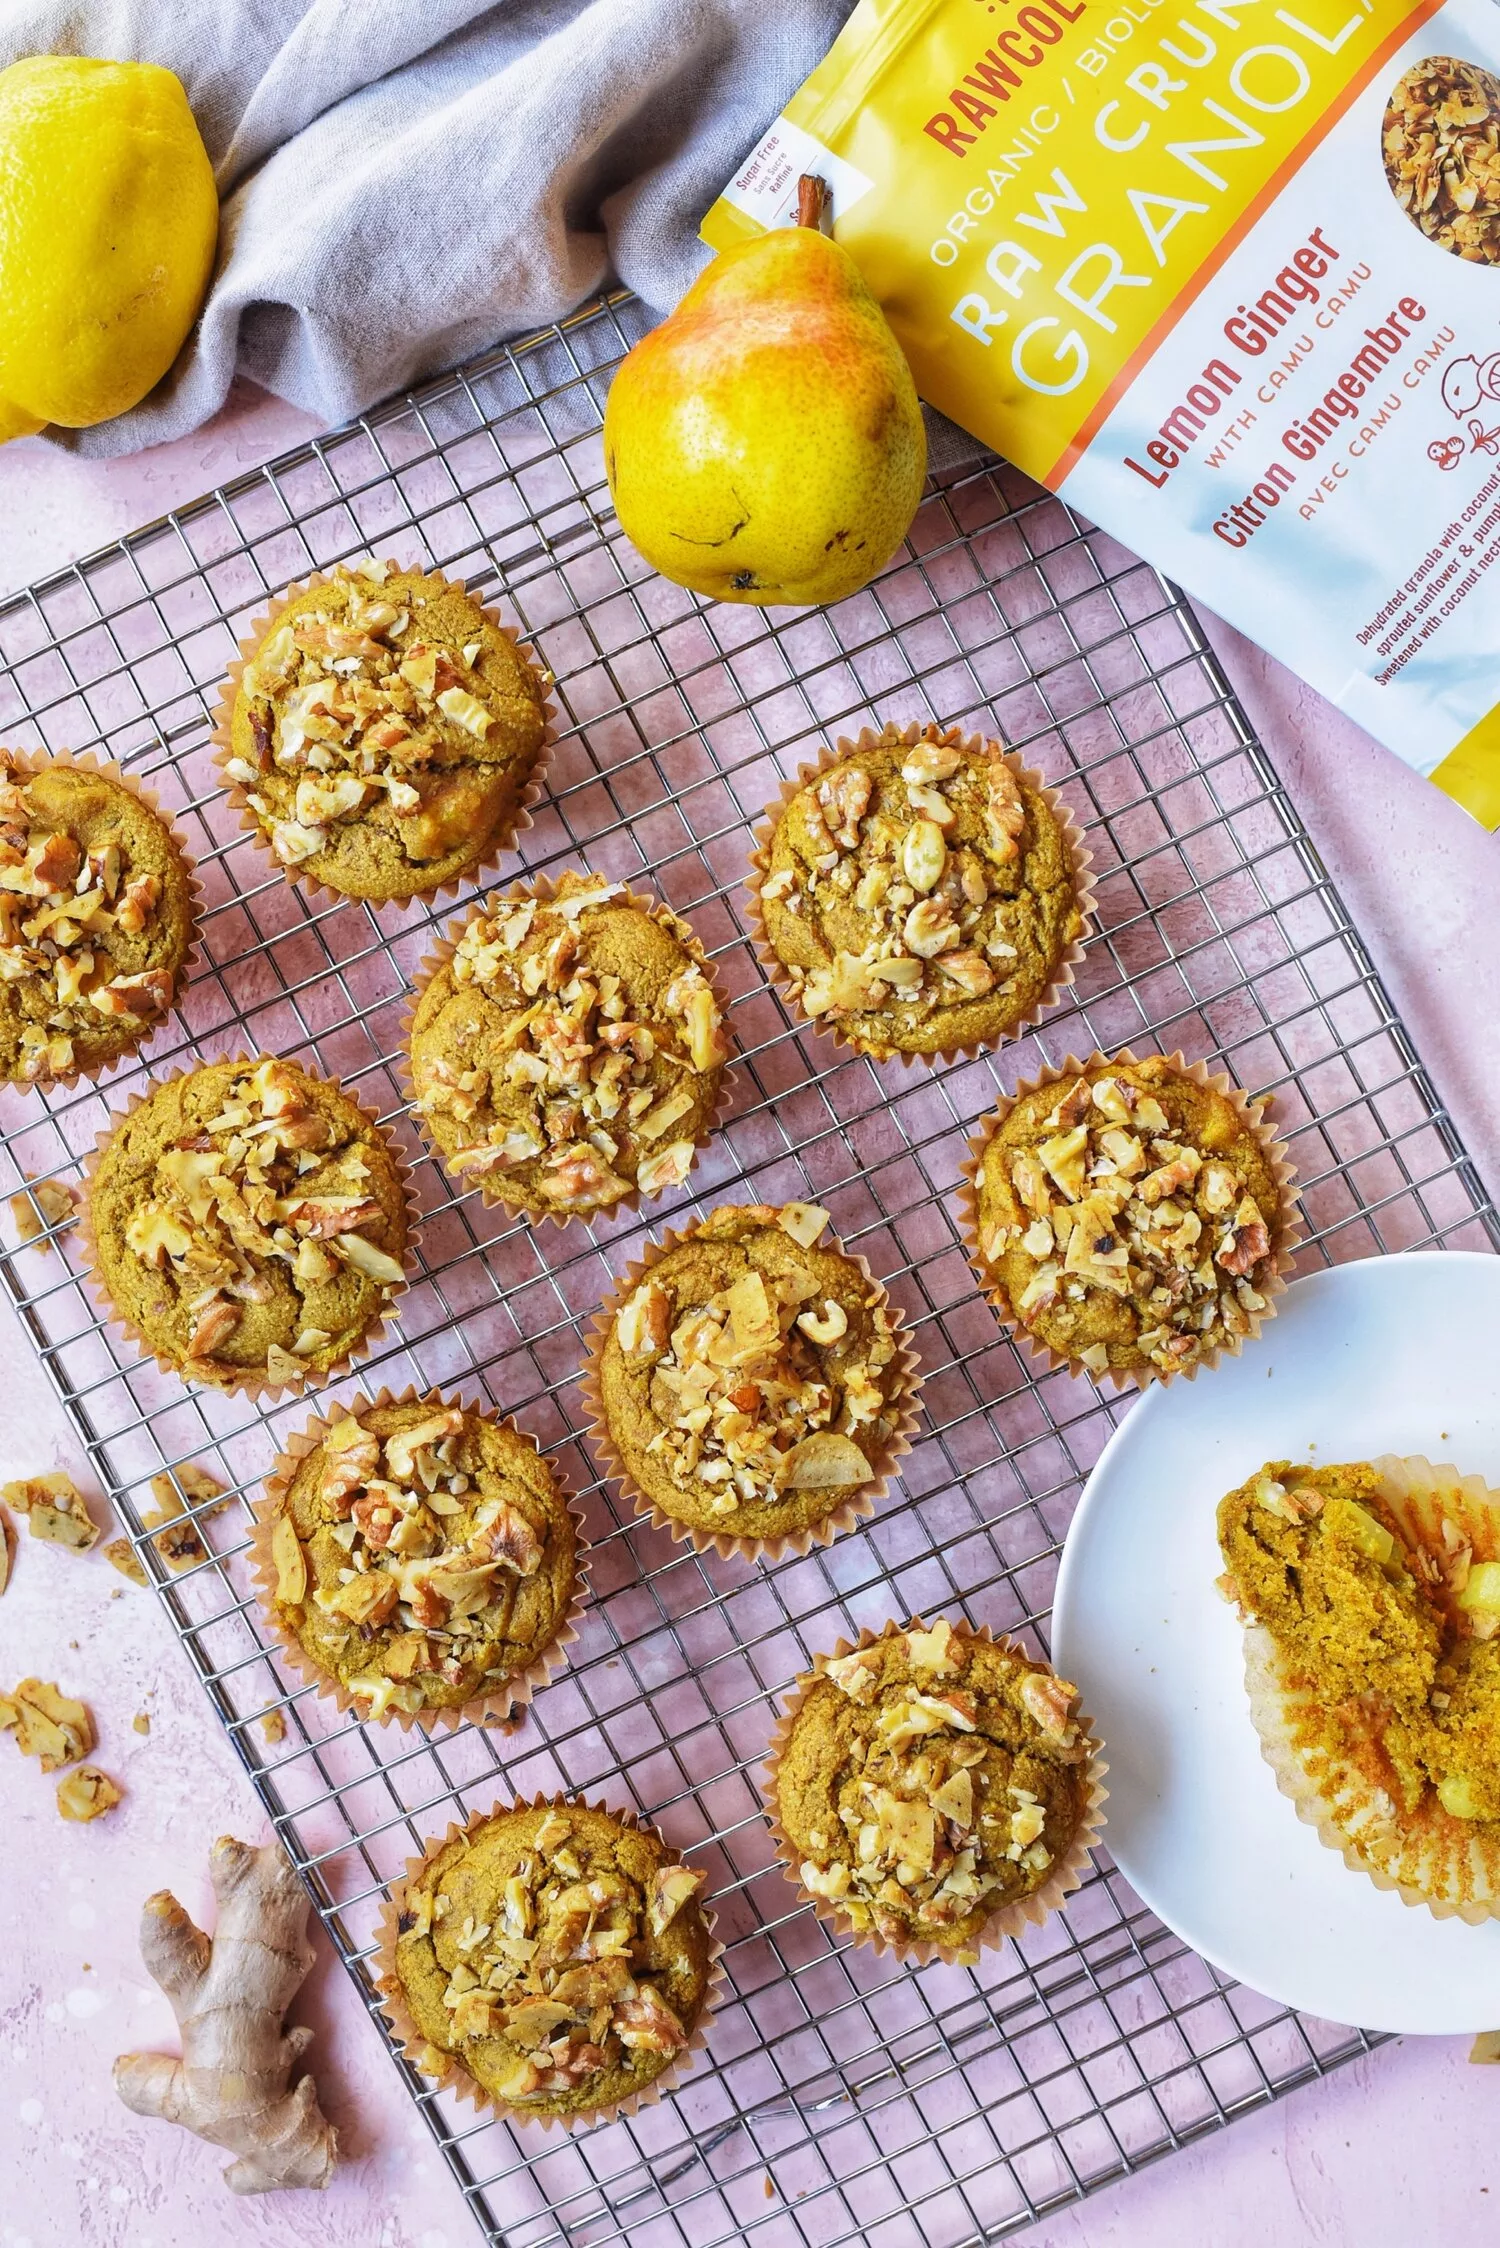 a cooling tray filled with beautifully decorated yellow turmeric lemon muffins, accompanied by a pear and bag of rawcology granola